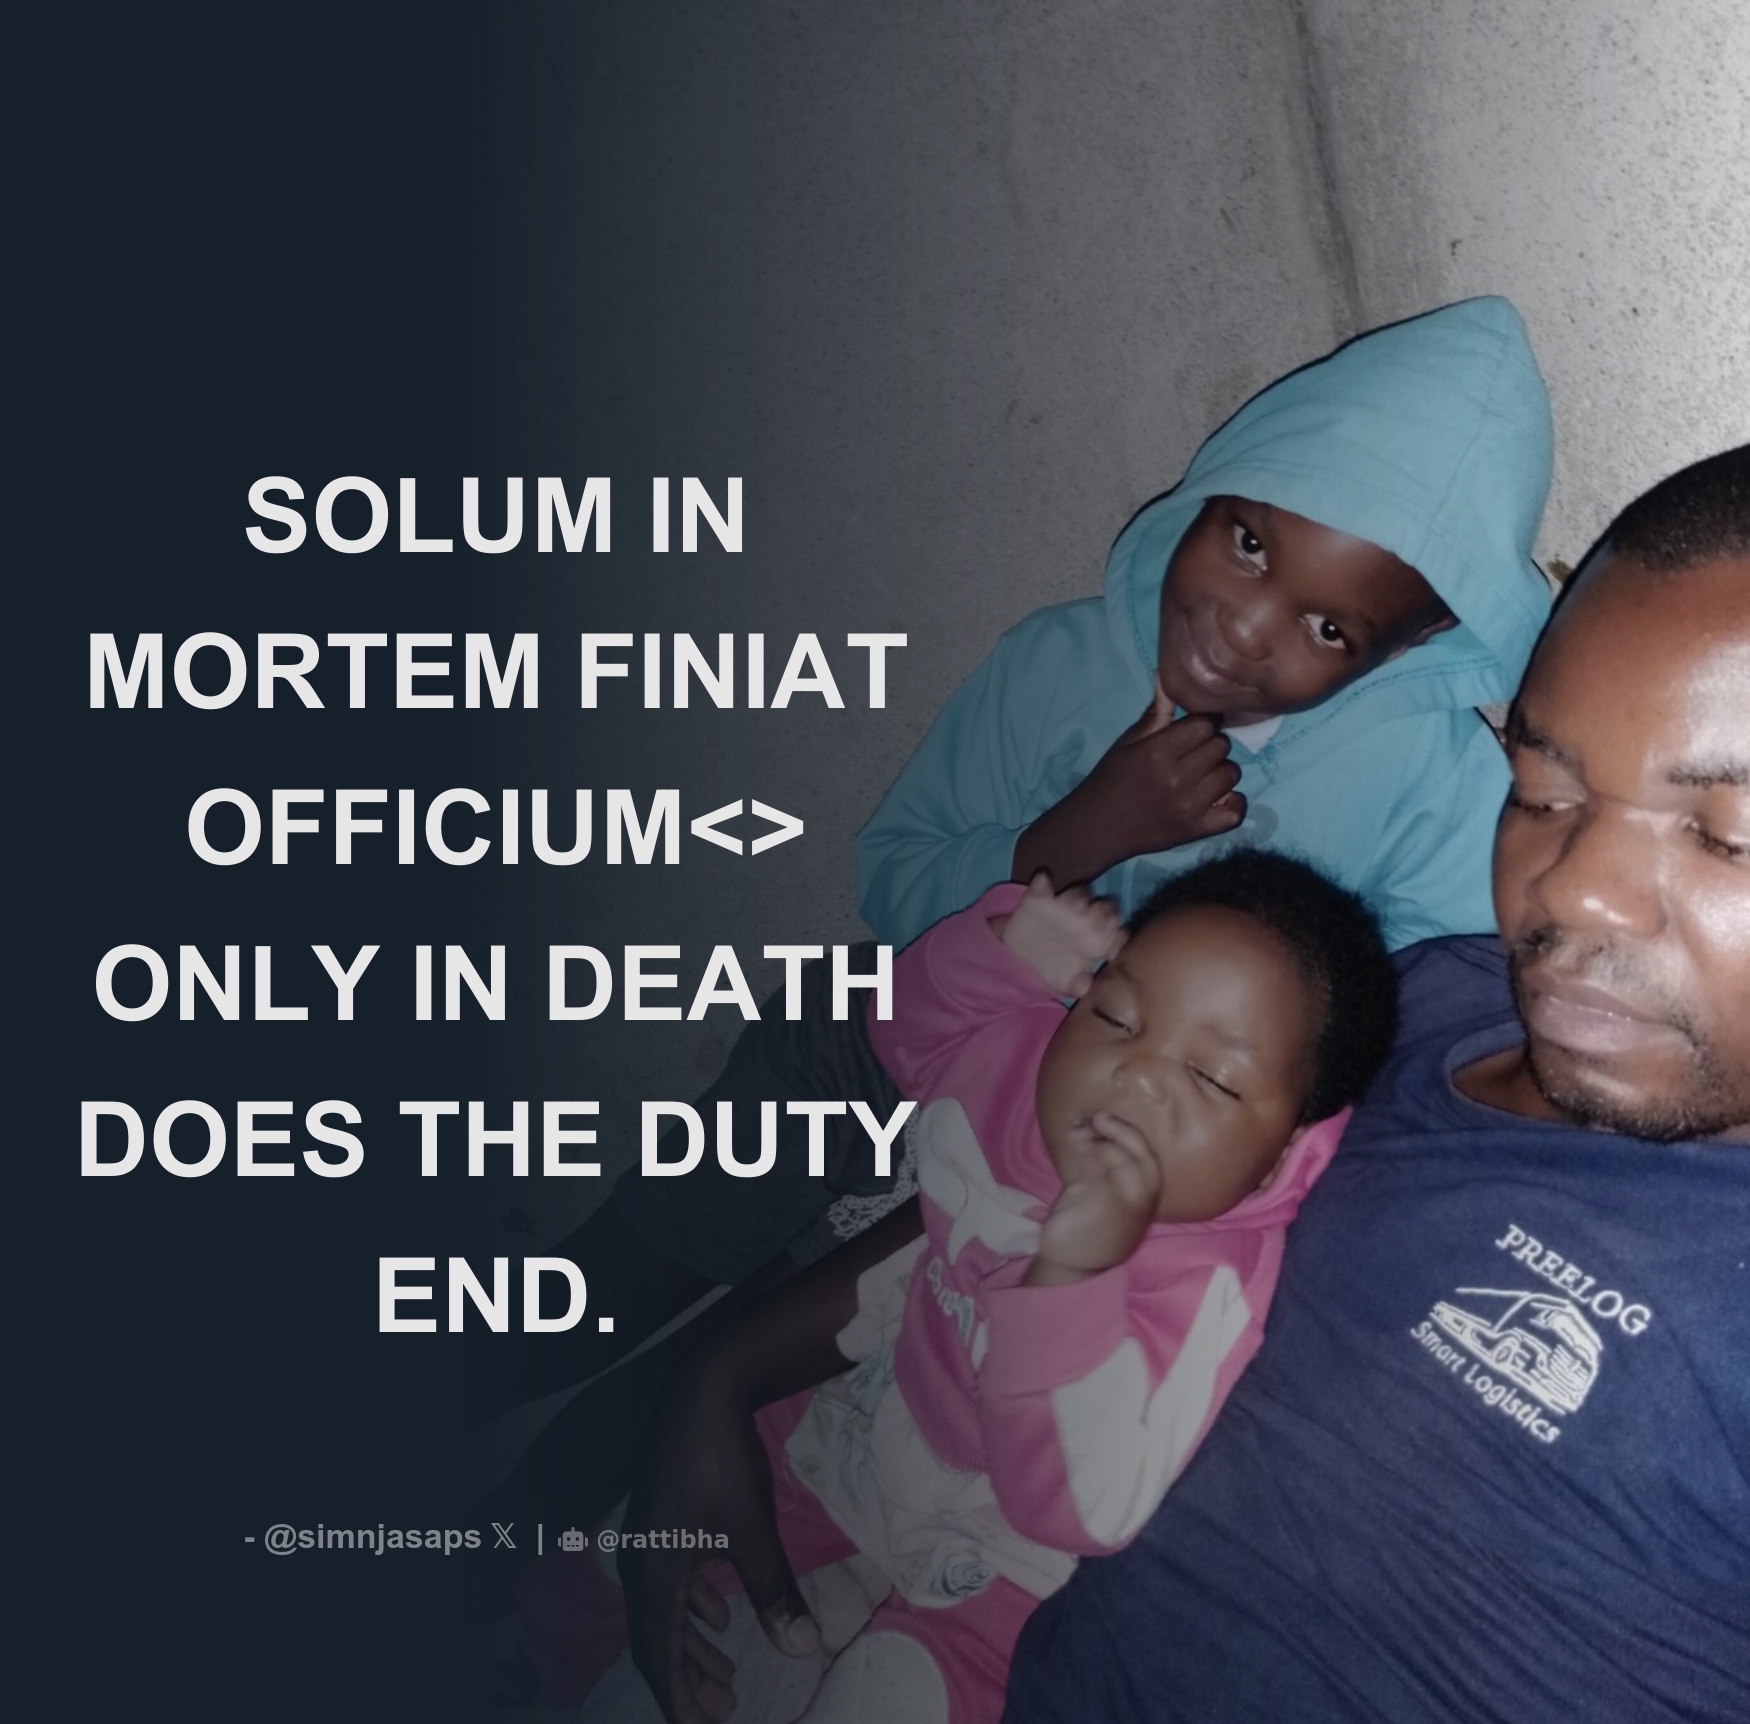 Solum In Mortem Finiat Officium Only In Death Does The Duty End Thread From Certified Voter